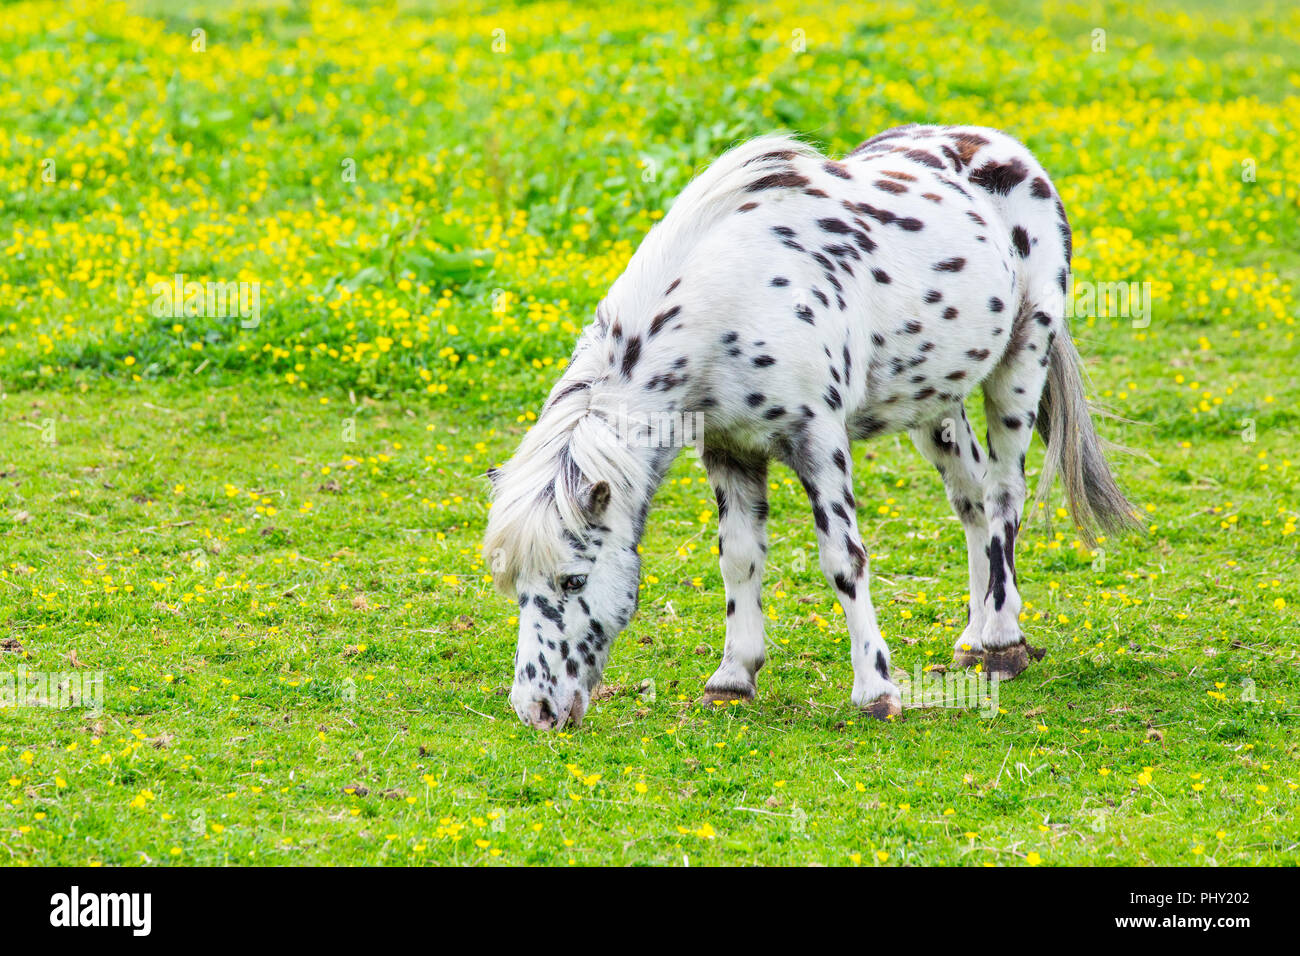 Black spotted white horse grazing in blooming dutch meadow Stock Photo